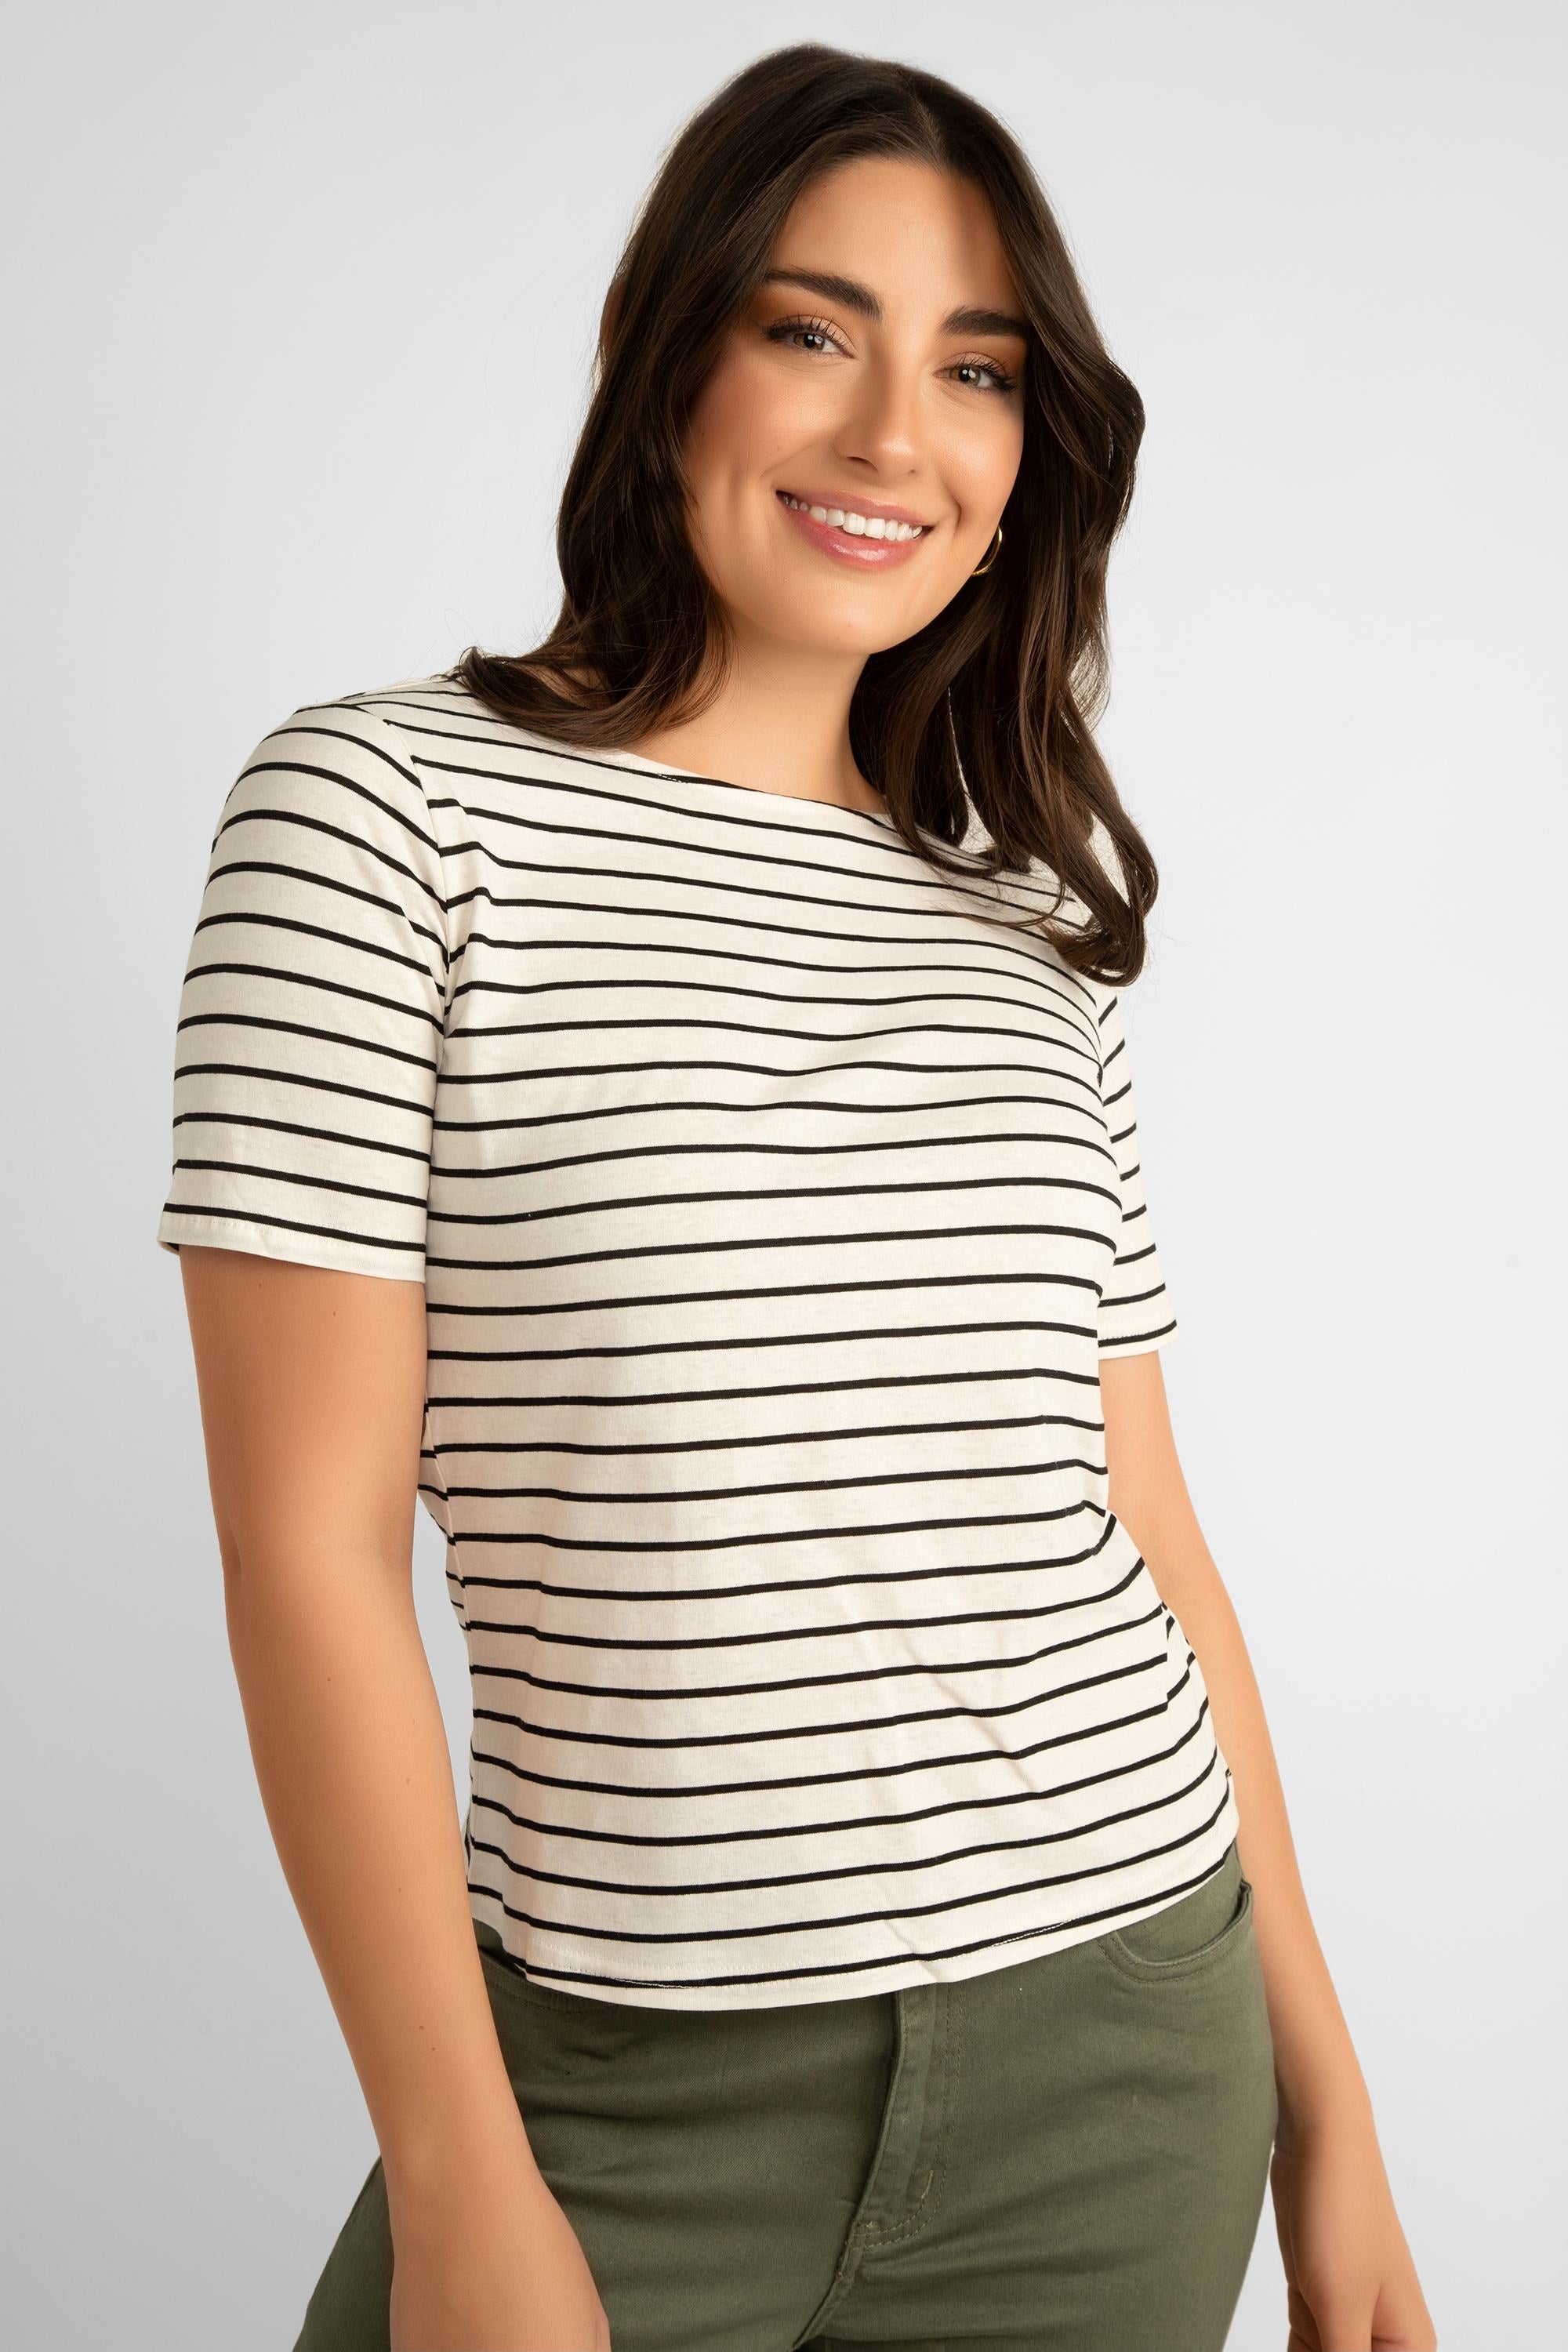 Pink Martini (TO-41128B) Women's Short Sleeve Striped Tee in Beige with Thin black horizontal stripes